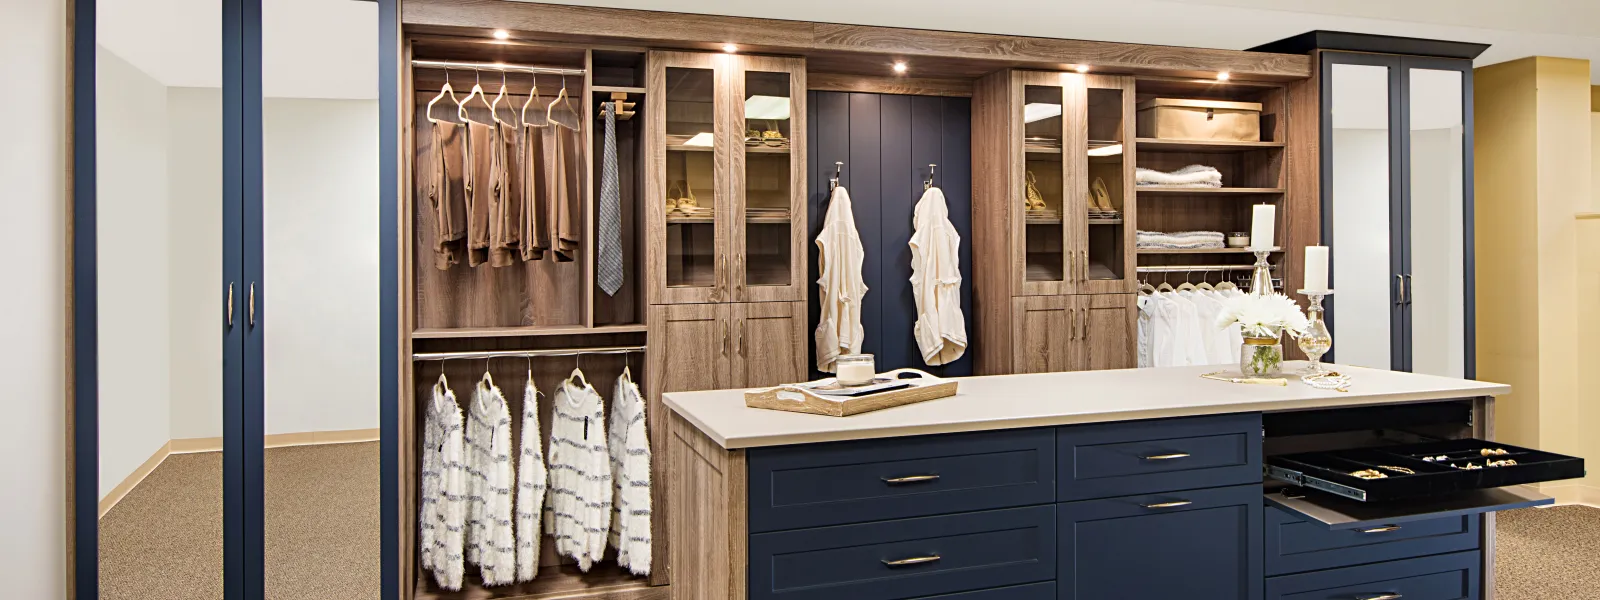 Build a Closet for Your Wardrobe with Custom Shelving Heights